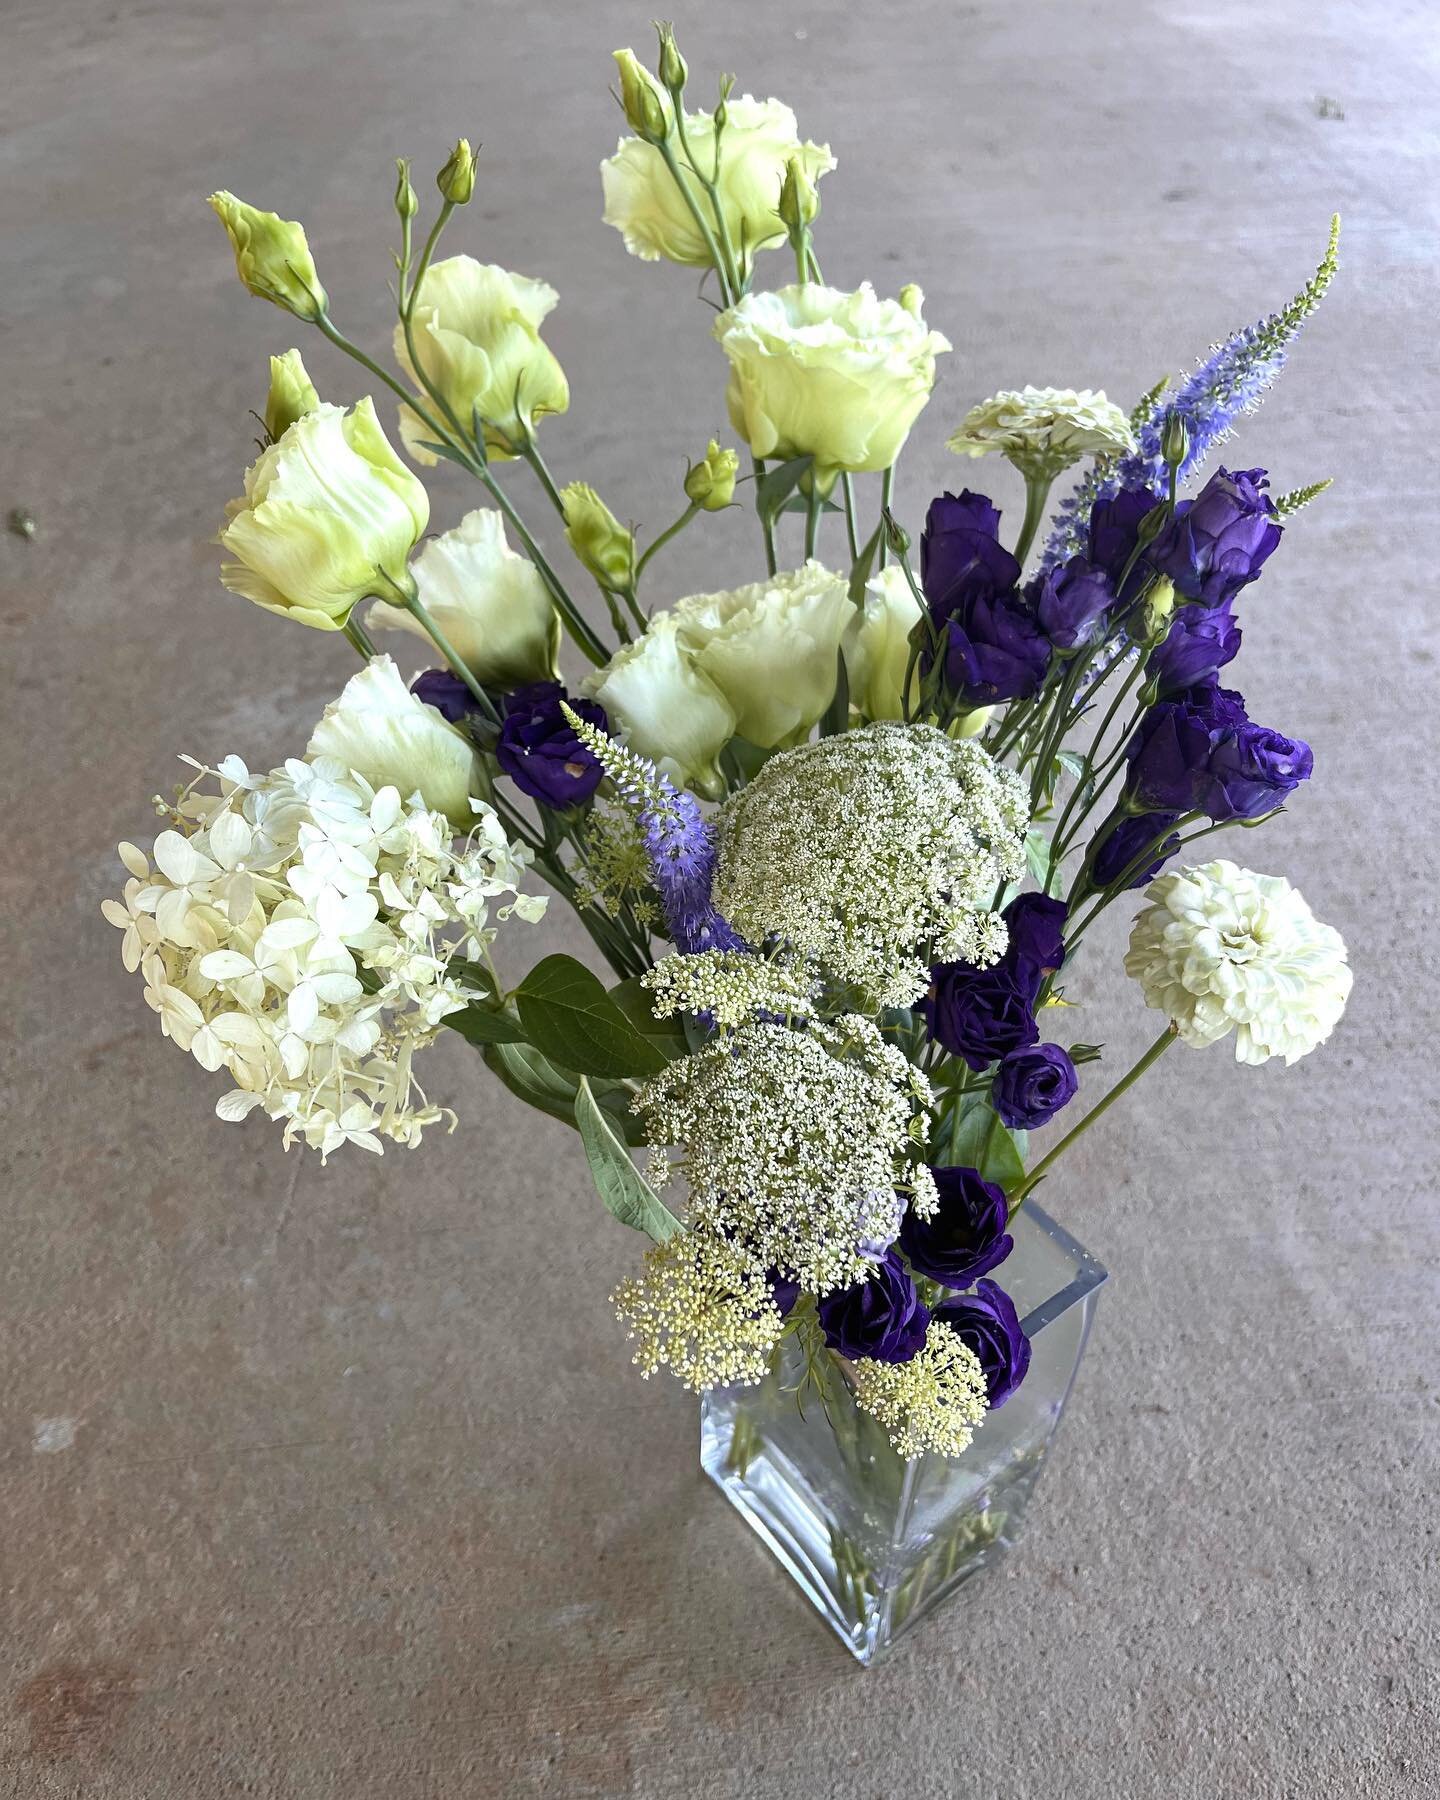 I got this lovely bouquet from @petalpatchflowerfarm a week ago and it is still looking great!  Julianne understands quality and the importance of vase life.  Check her out at the Leesburg Market every Saturday.